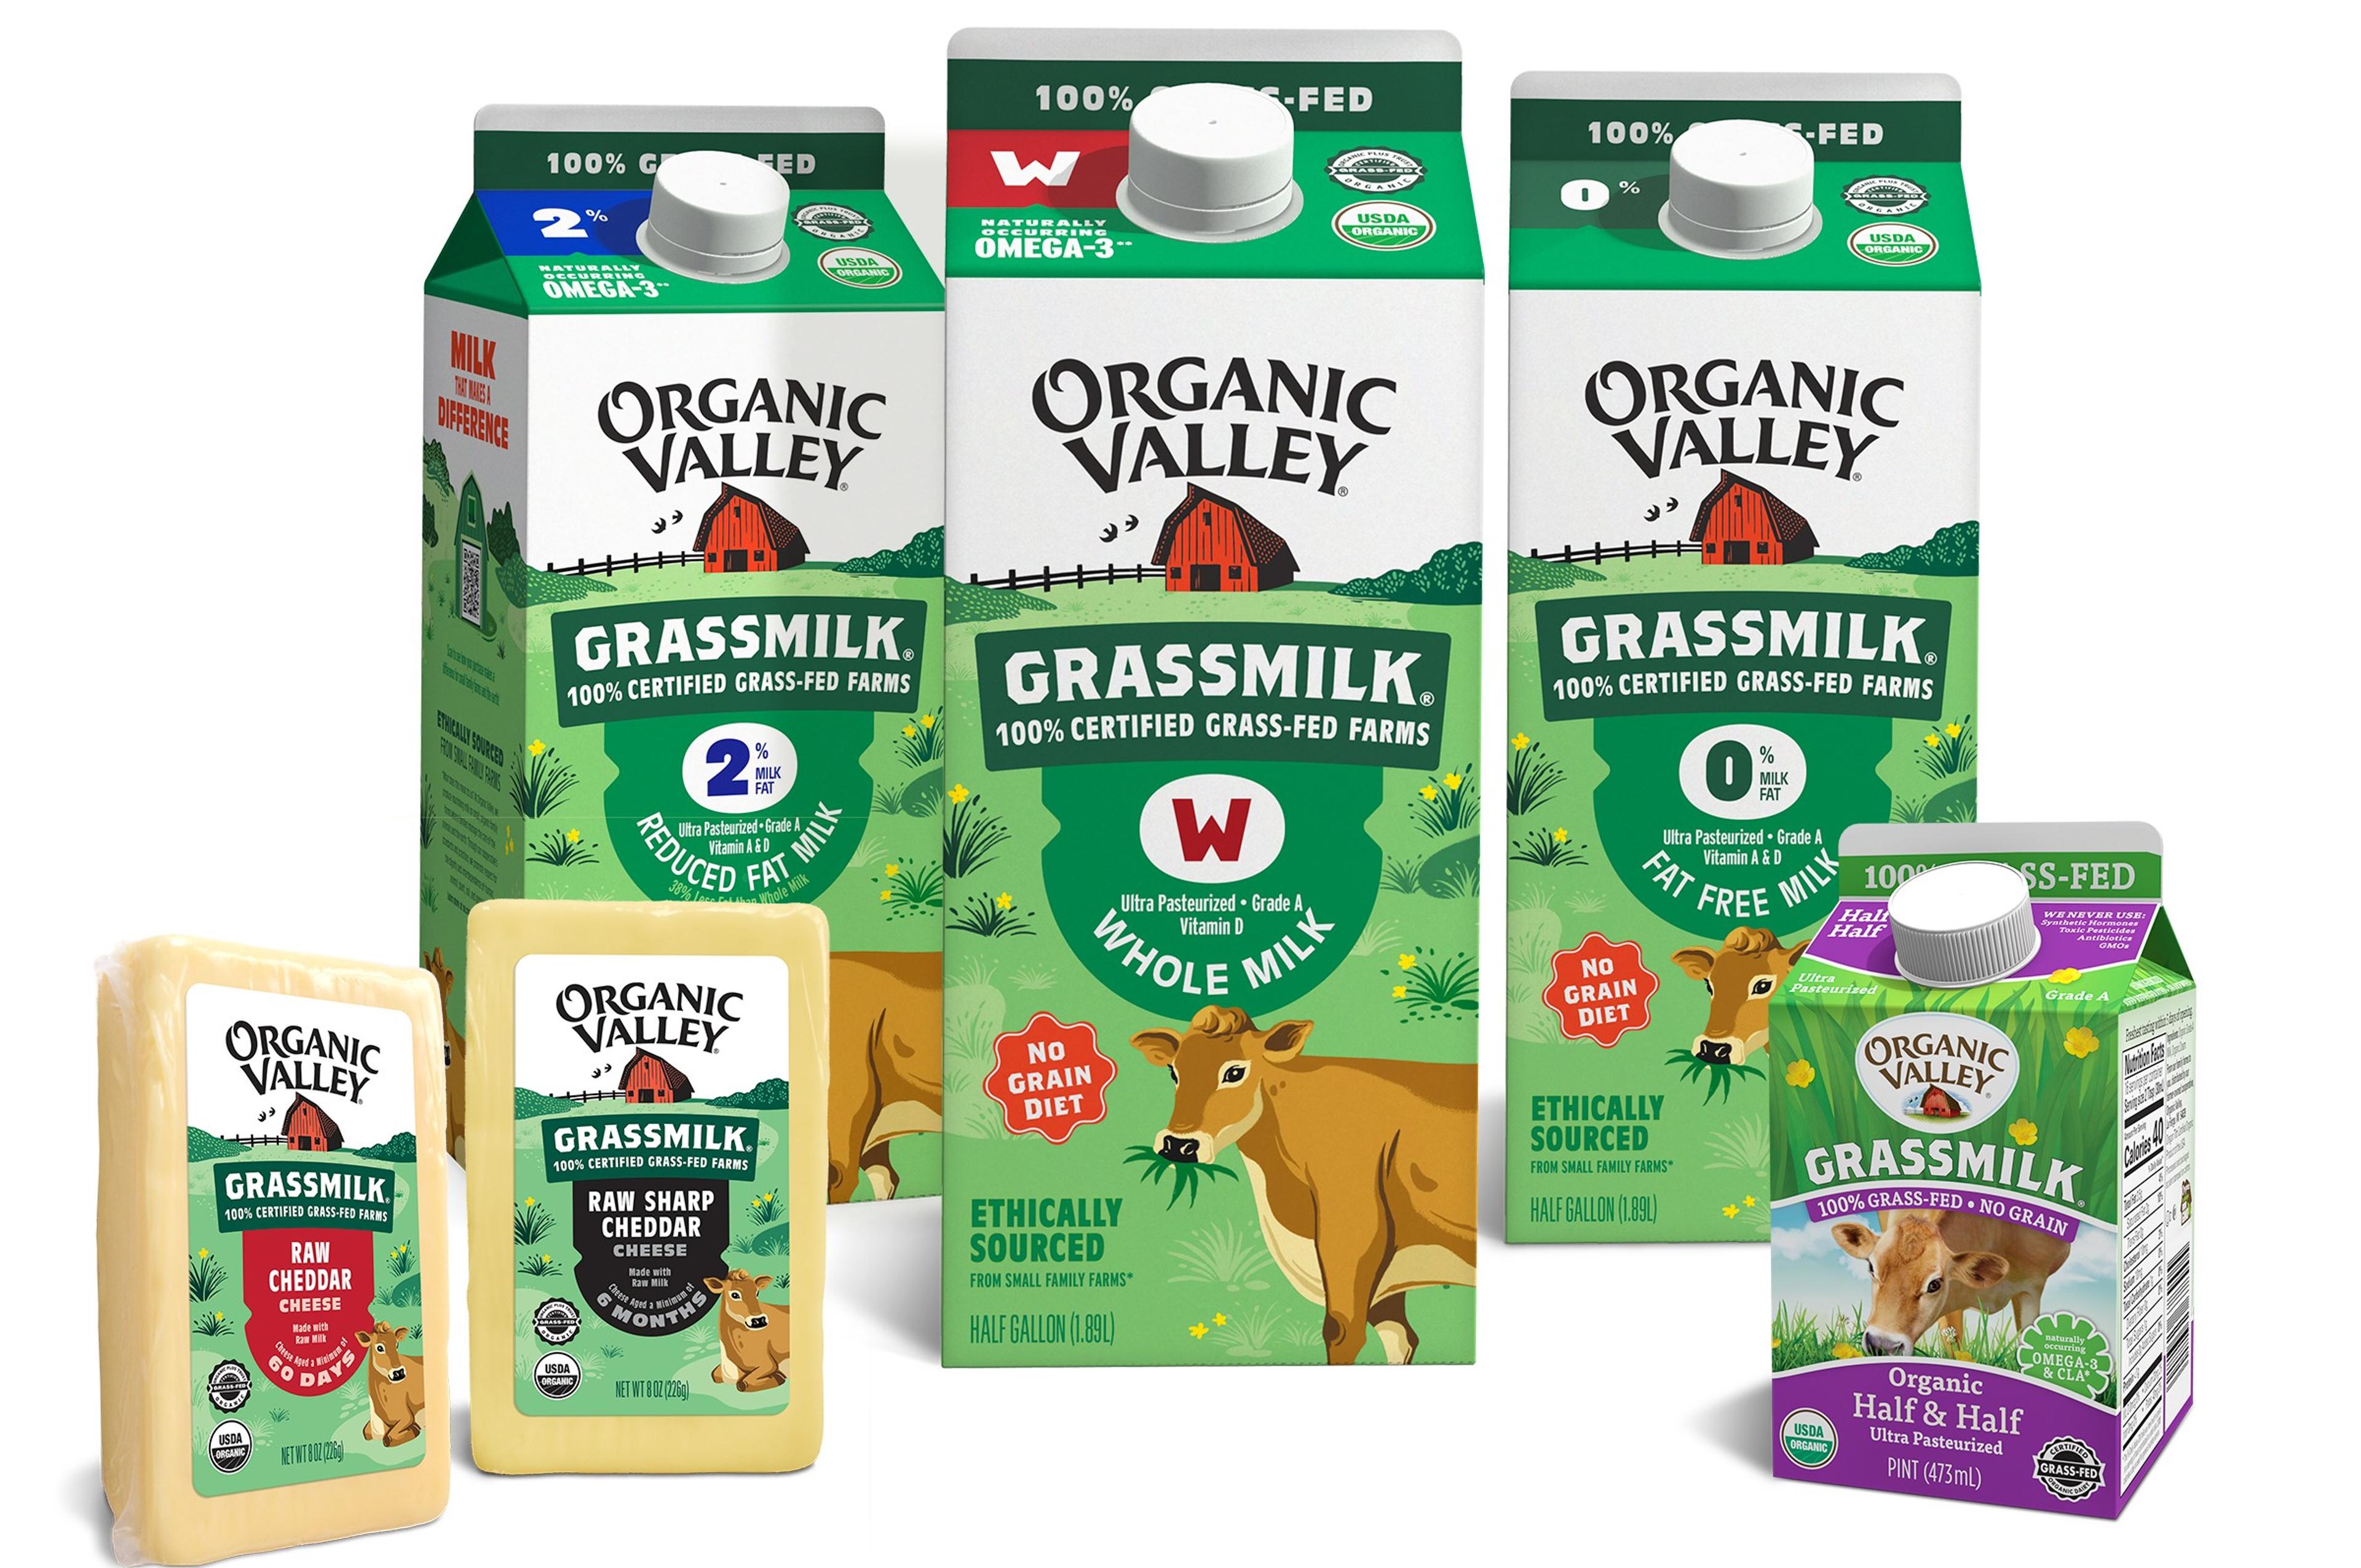 Cartons of Organic Valley Grassmilk dairy products.